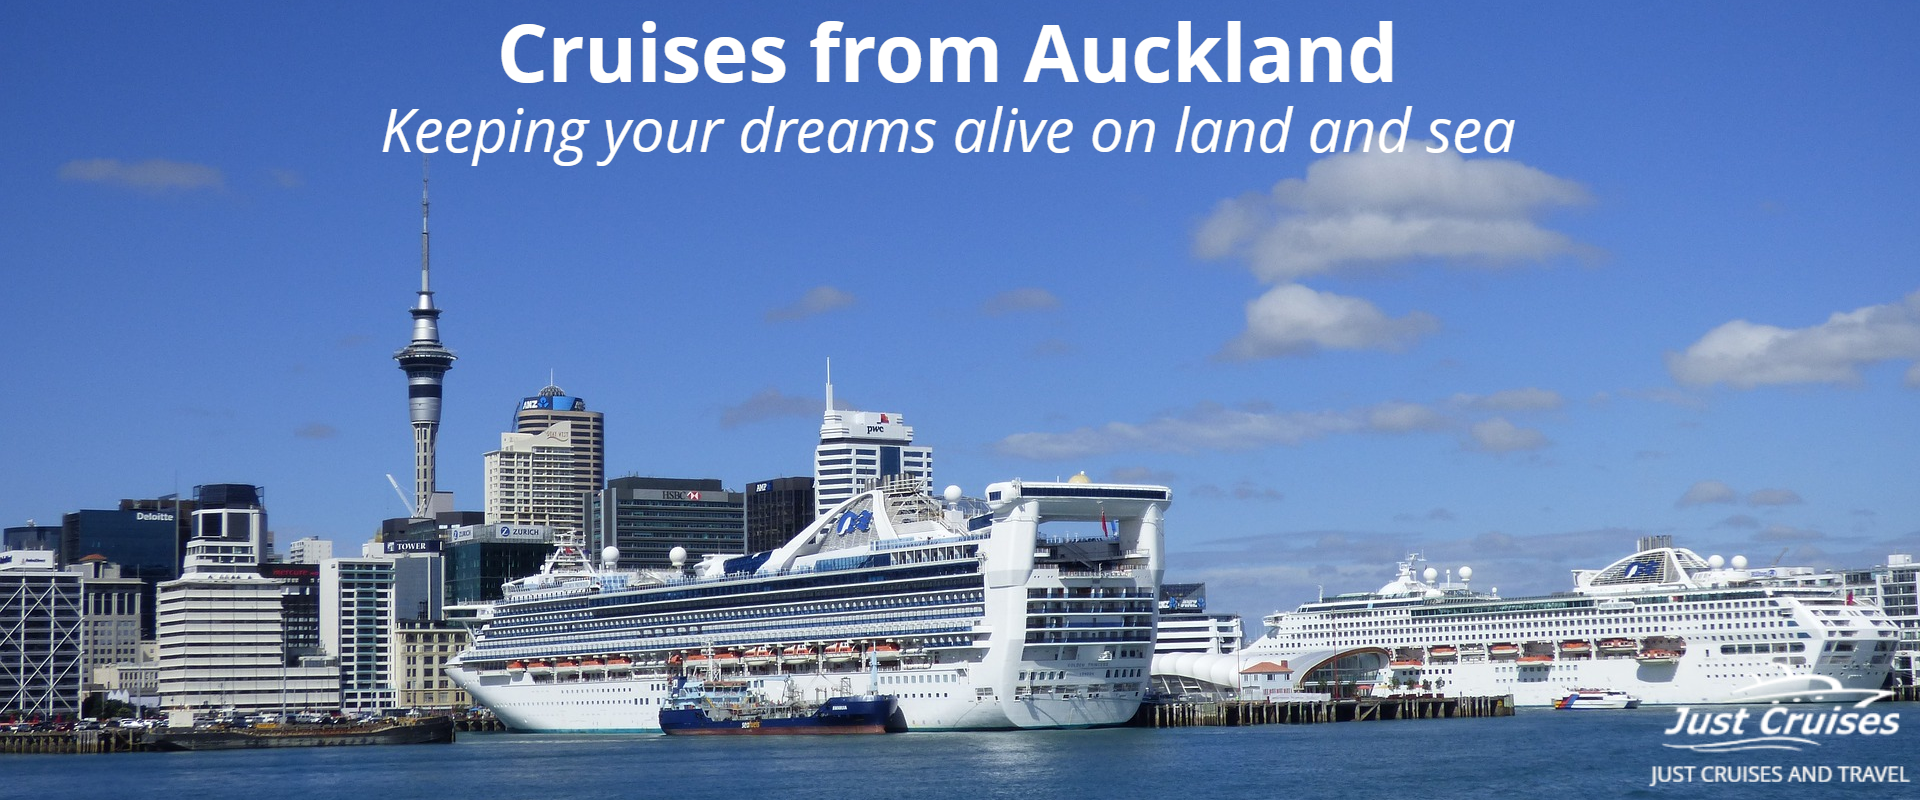 Cruises from Auckland Just Cruises